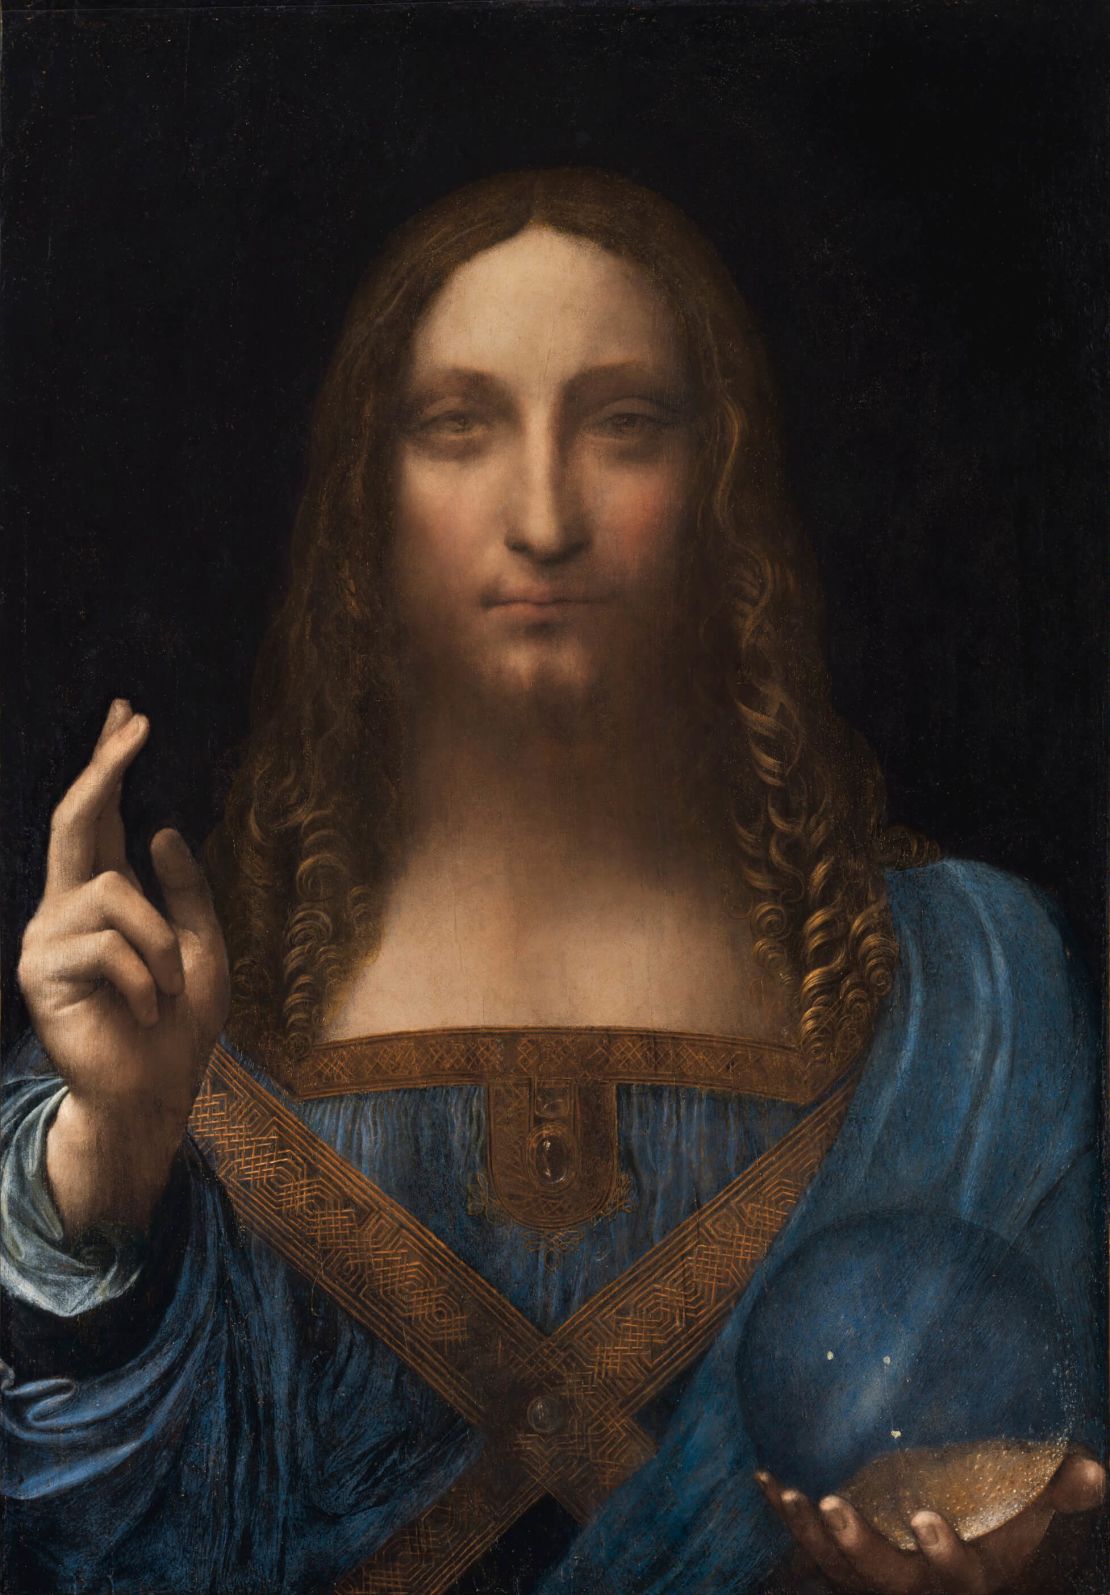 "Salvator Mundi" hasn't been seen since 2017, when it sold for $450.3 million at Christie's.